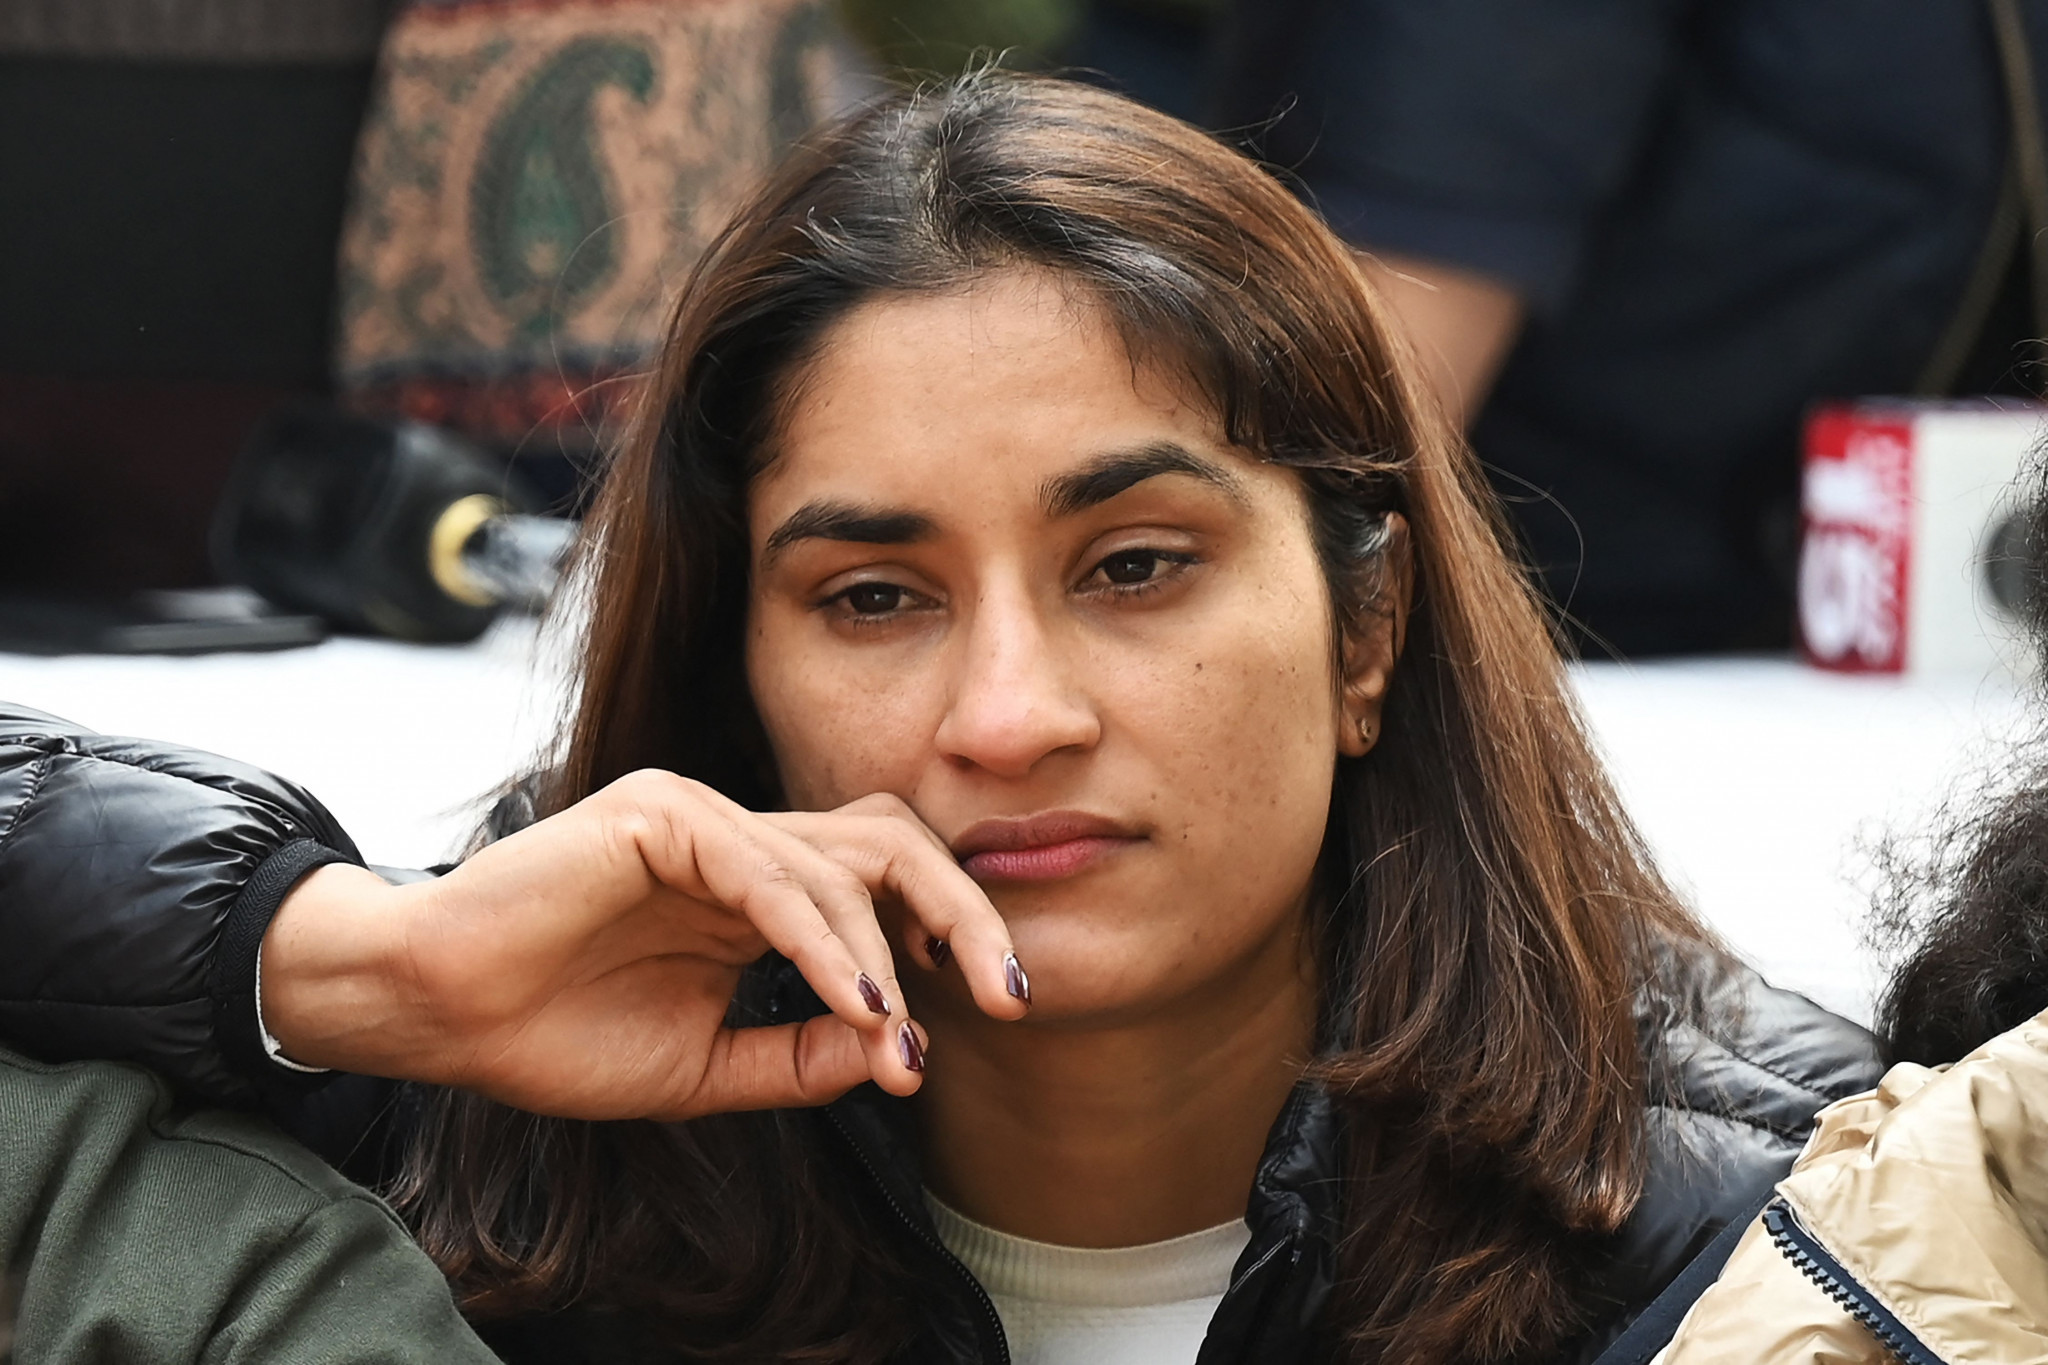 Vinesh Phogat has claimed that an unnamed member of the Oversight Committee has leaked sensitive information linked to the Wrestling Federation of India investigation ©Getty Images